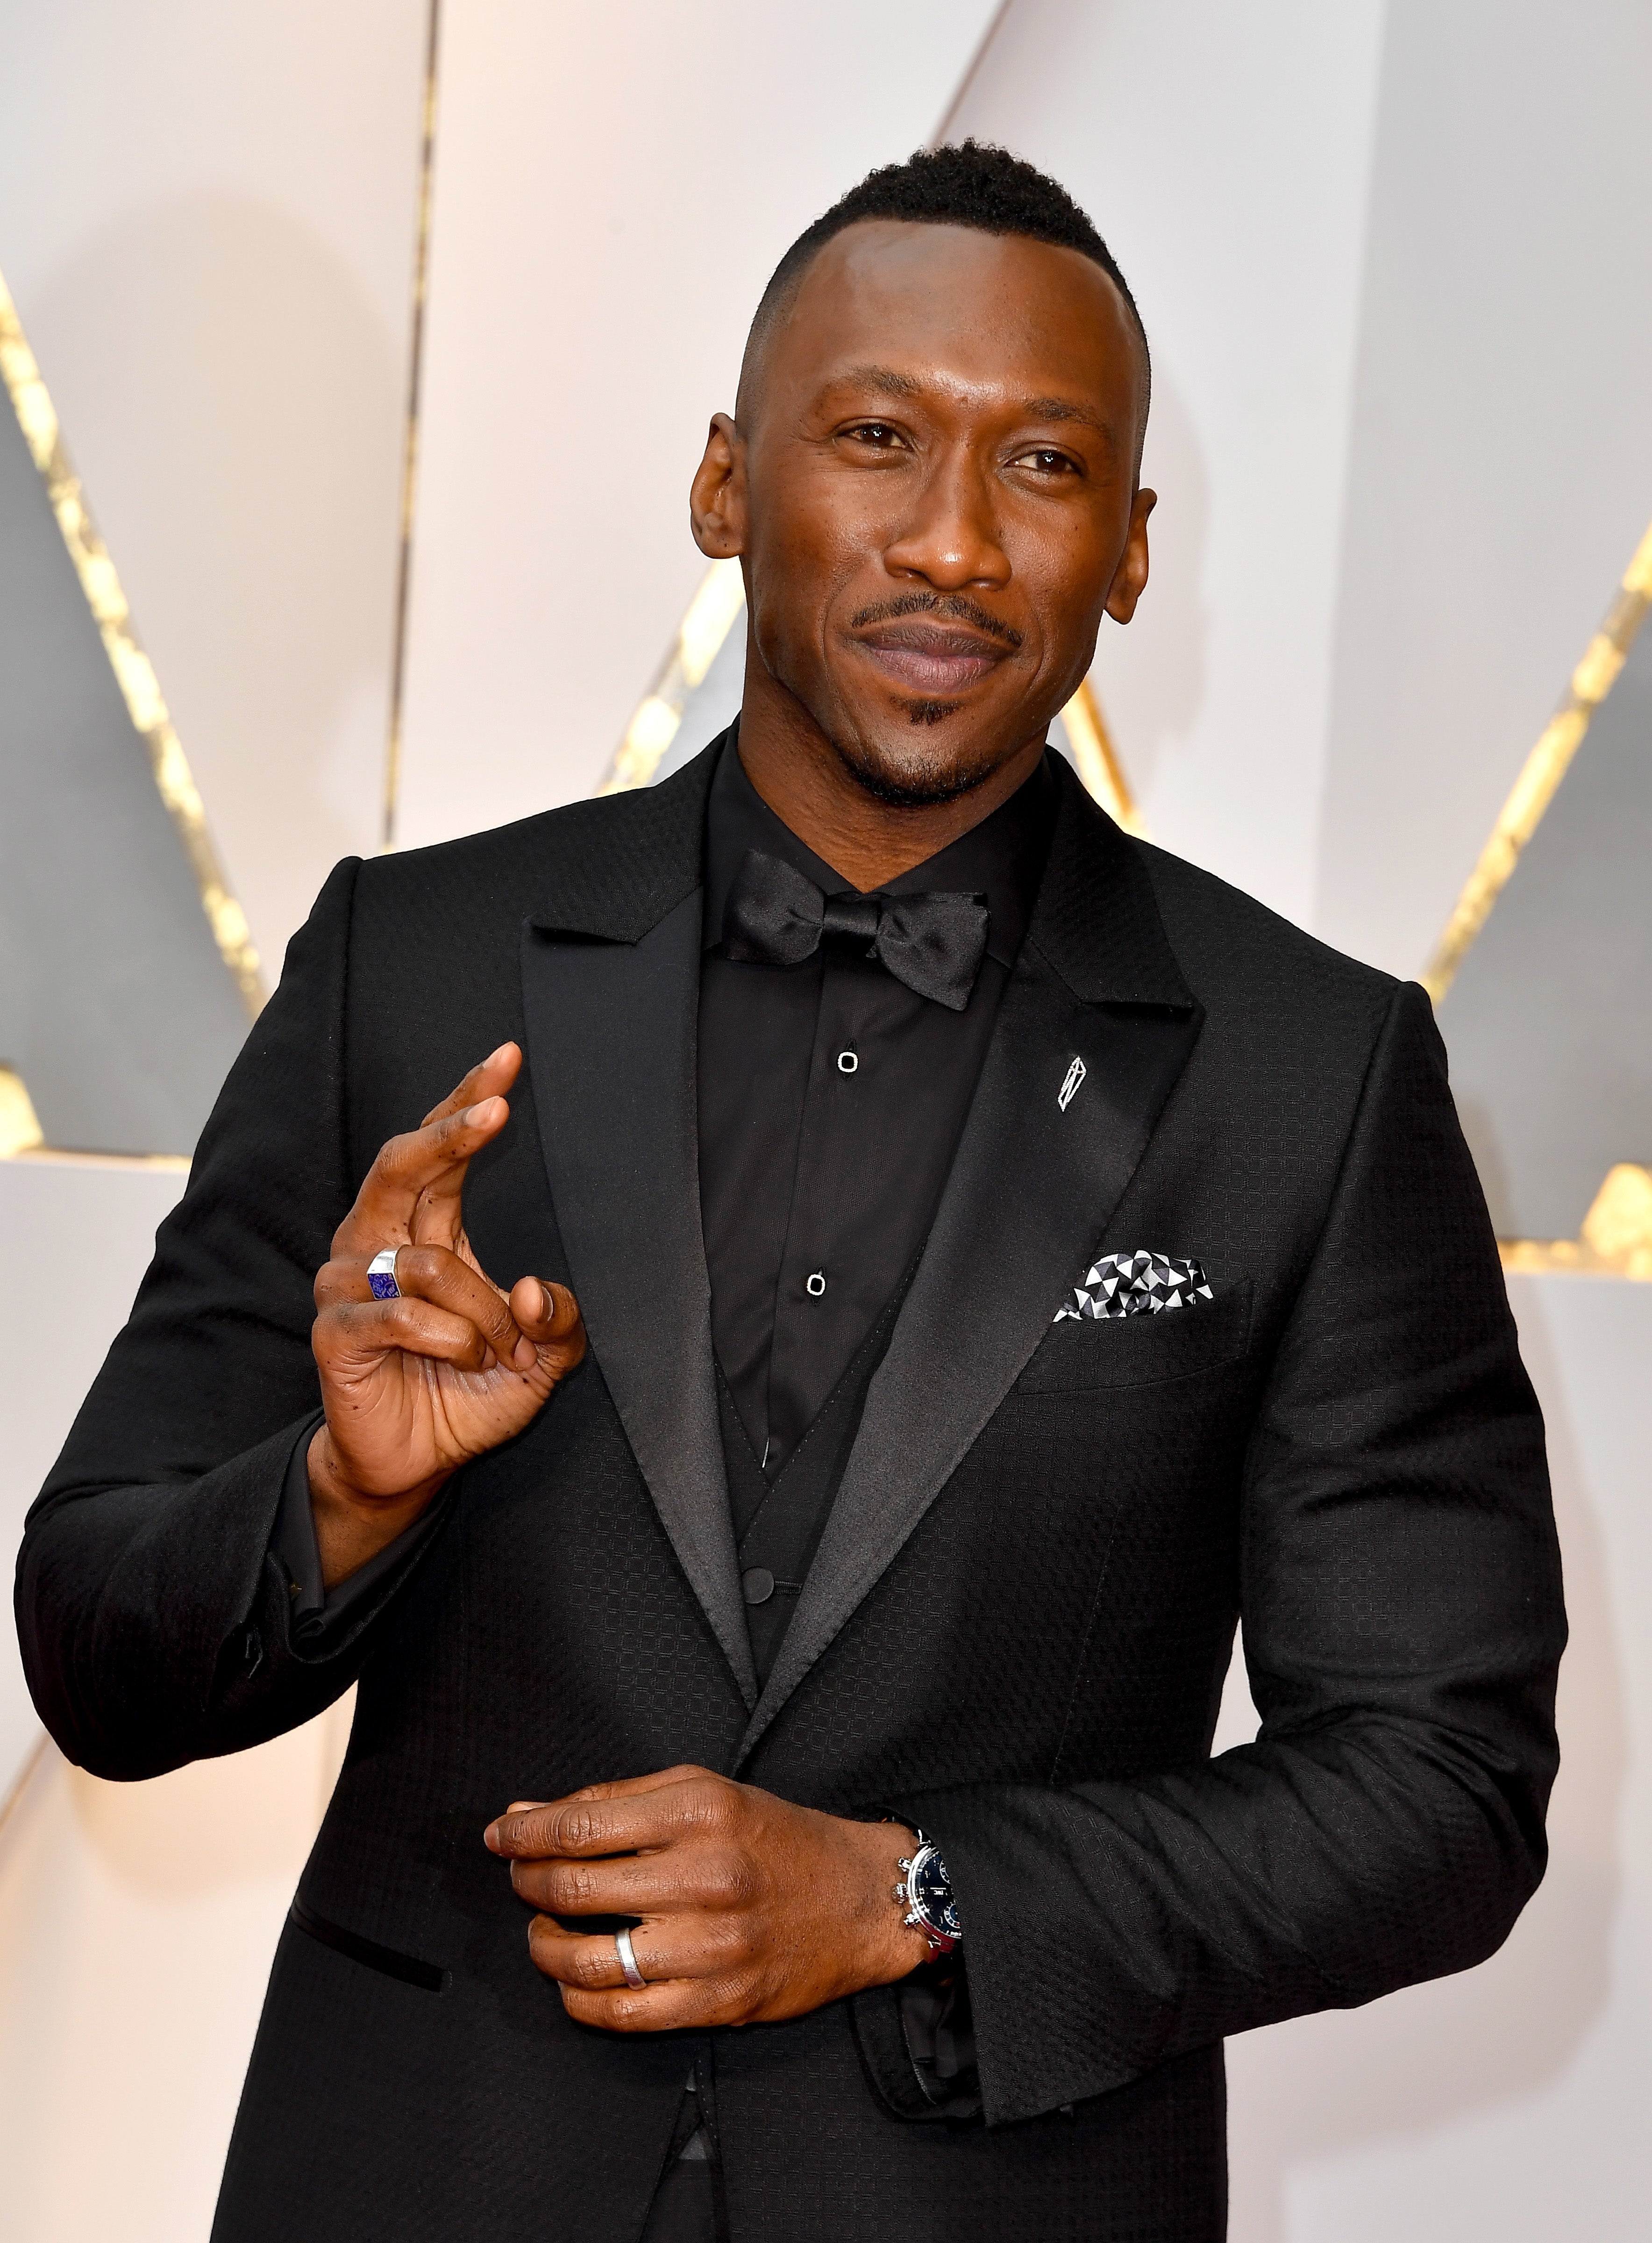 You Have To Hear Mahershala Ali’s Raps From Back In The Day